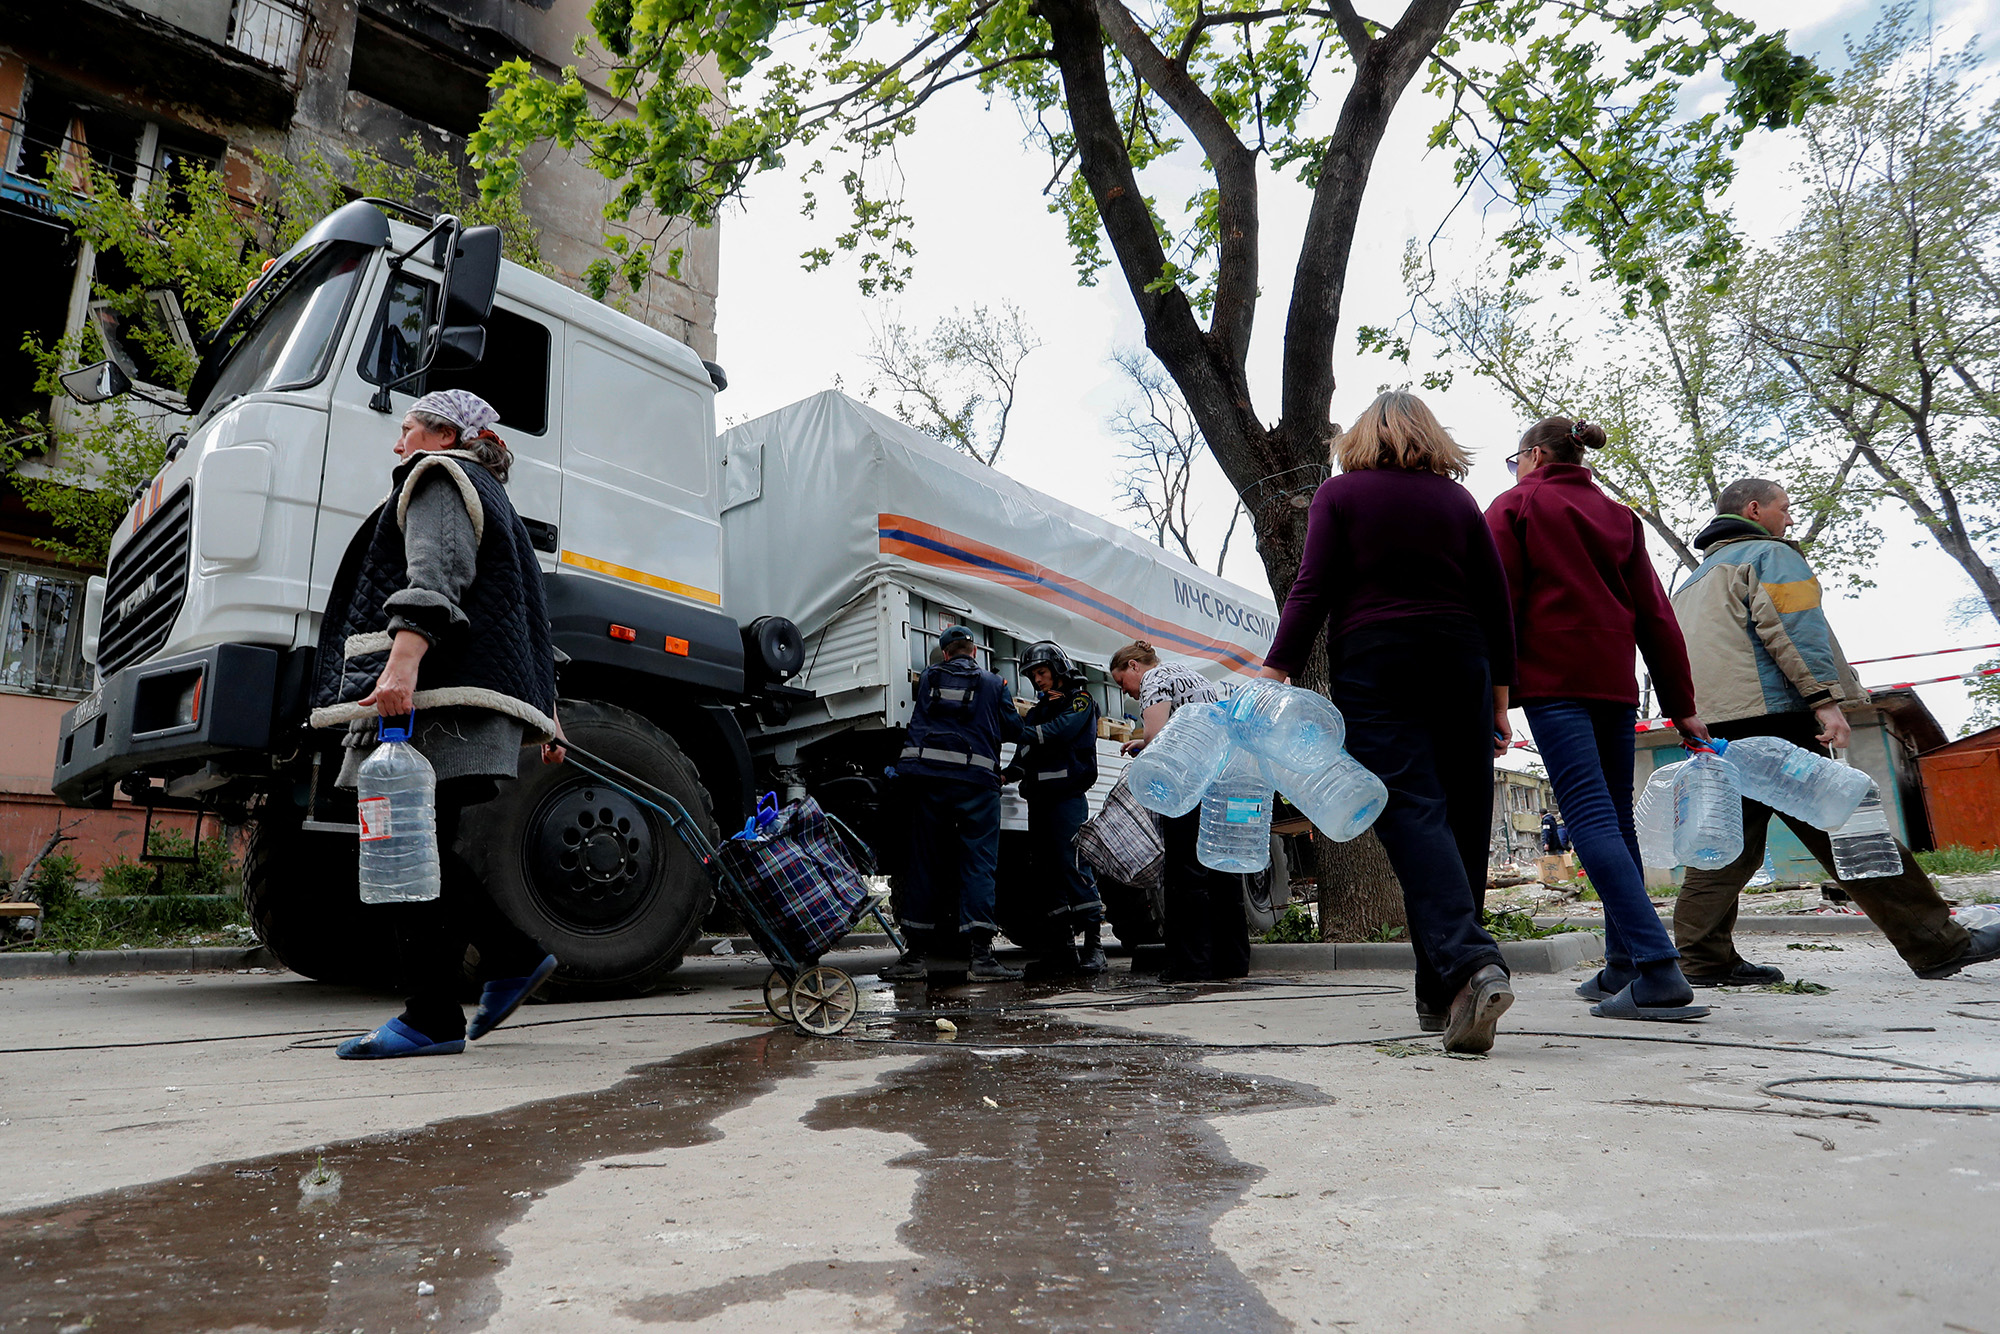 Local residents gather near a tanker to collect potable water in Mariupol, Ukraine, on May 11.